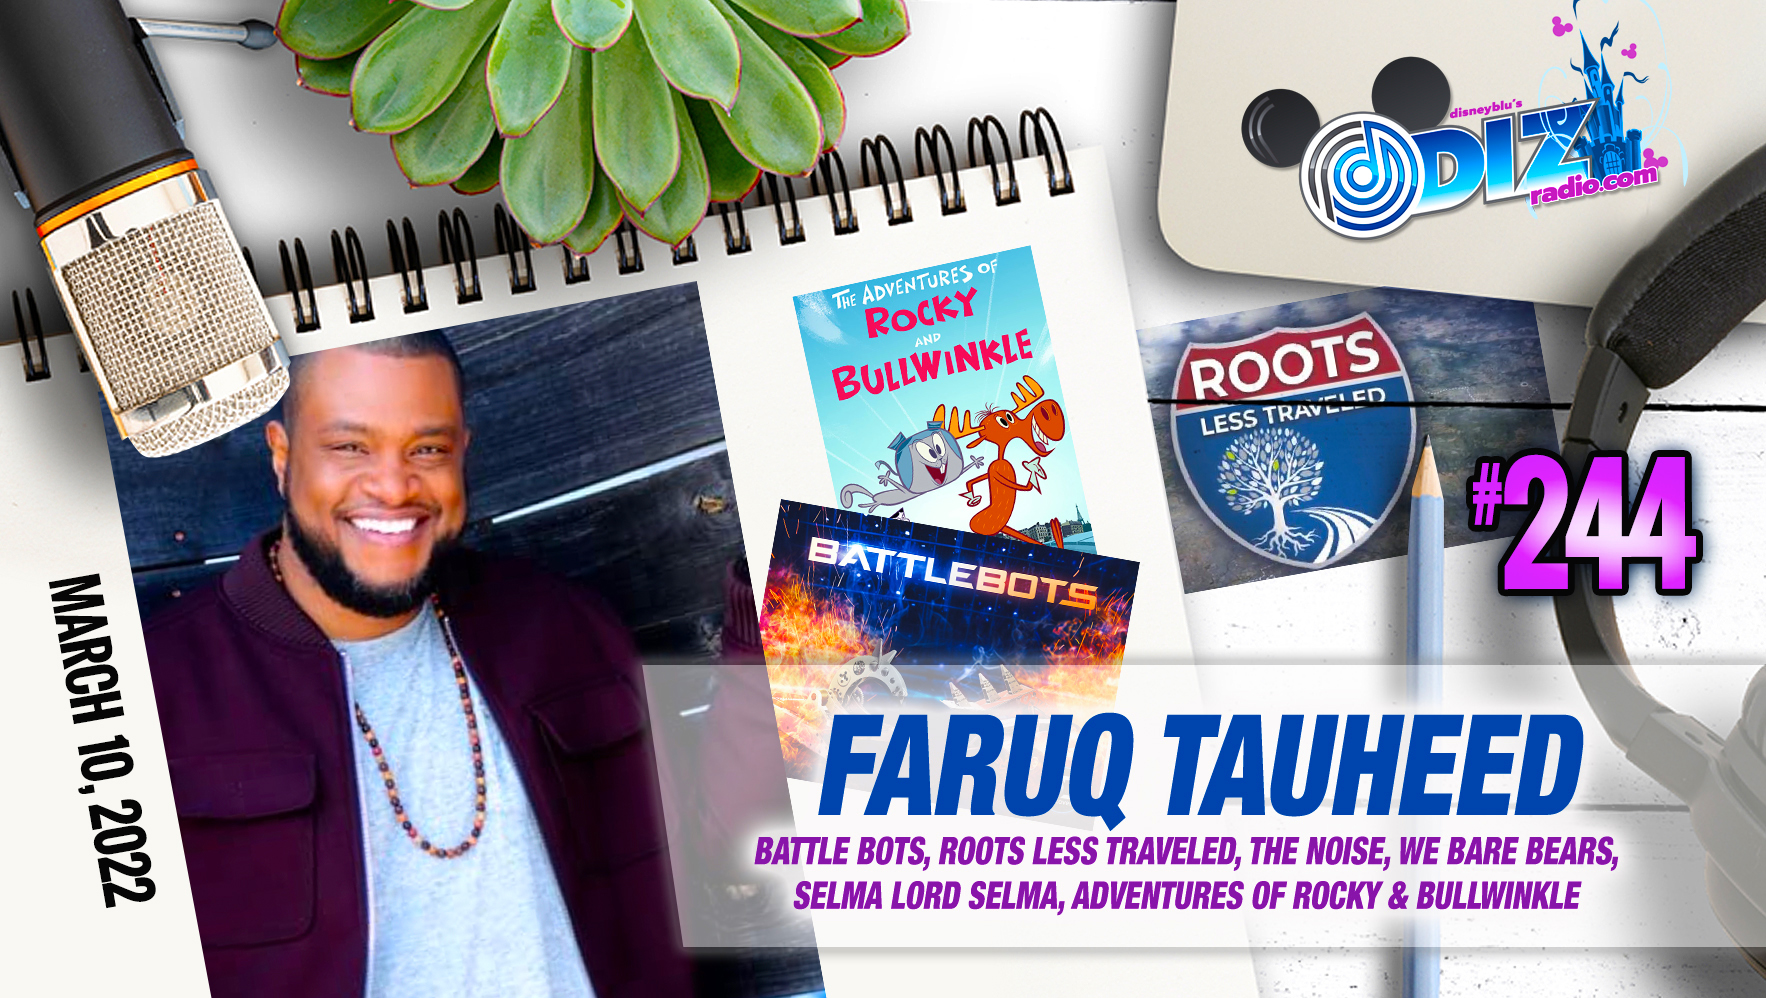 DizRadio Show #244: Guest FARUQ TAUHEED (Battle Bots, Roots Less Traveled, The Noise, Selma Lord Selma, The Adventures of Rocky & Bullwinkle)